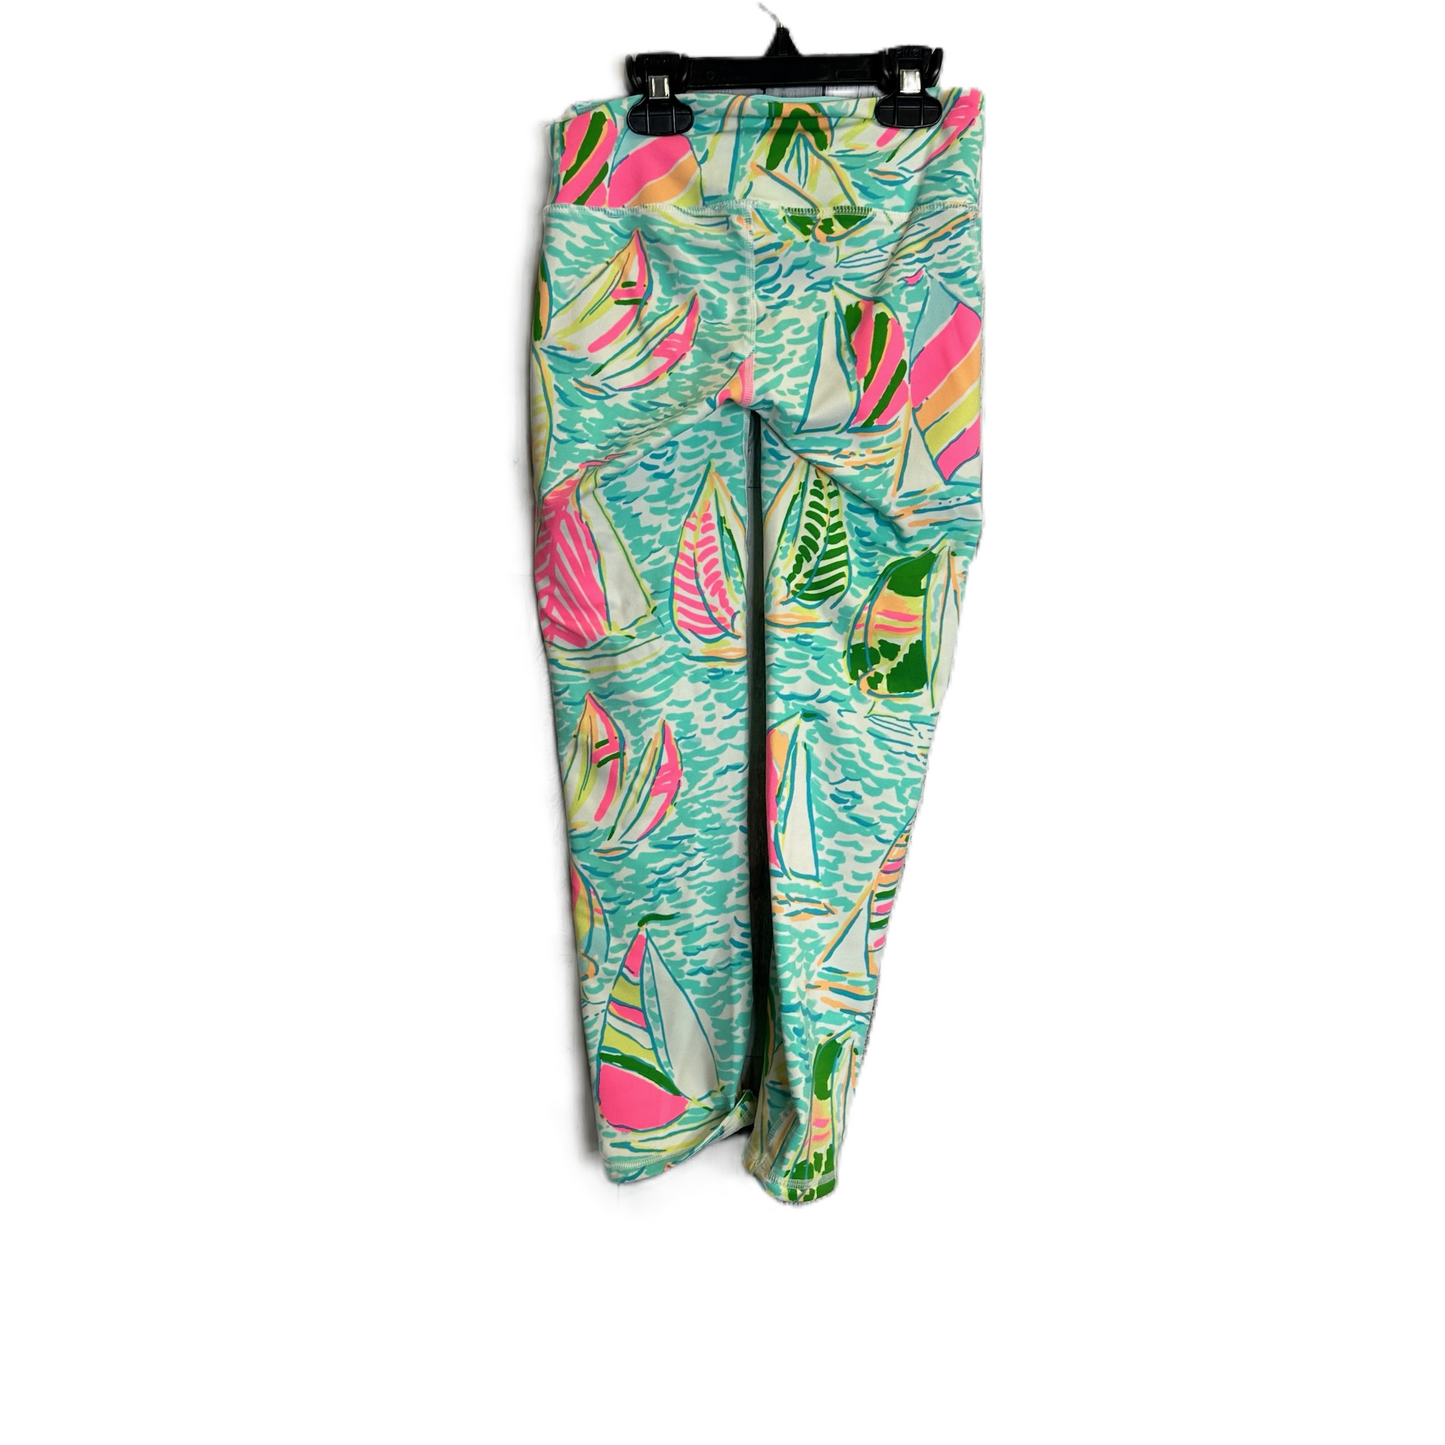 Blue Athletic Leggings Capris By Lilly Pulitzer, Size: Xxs